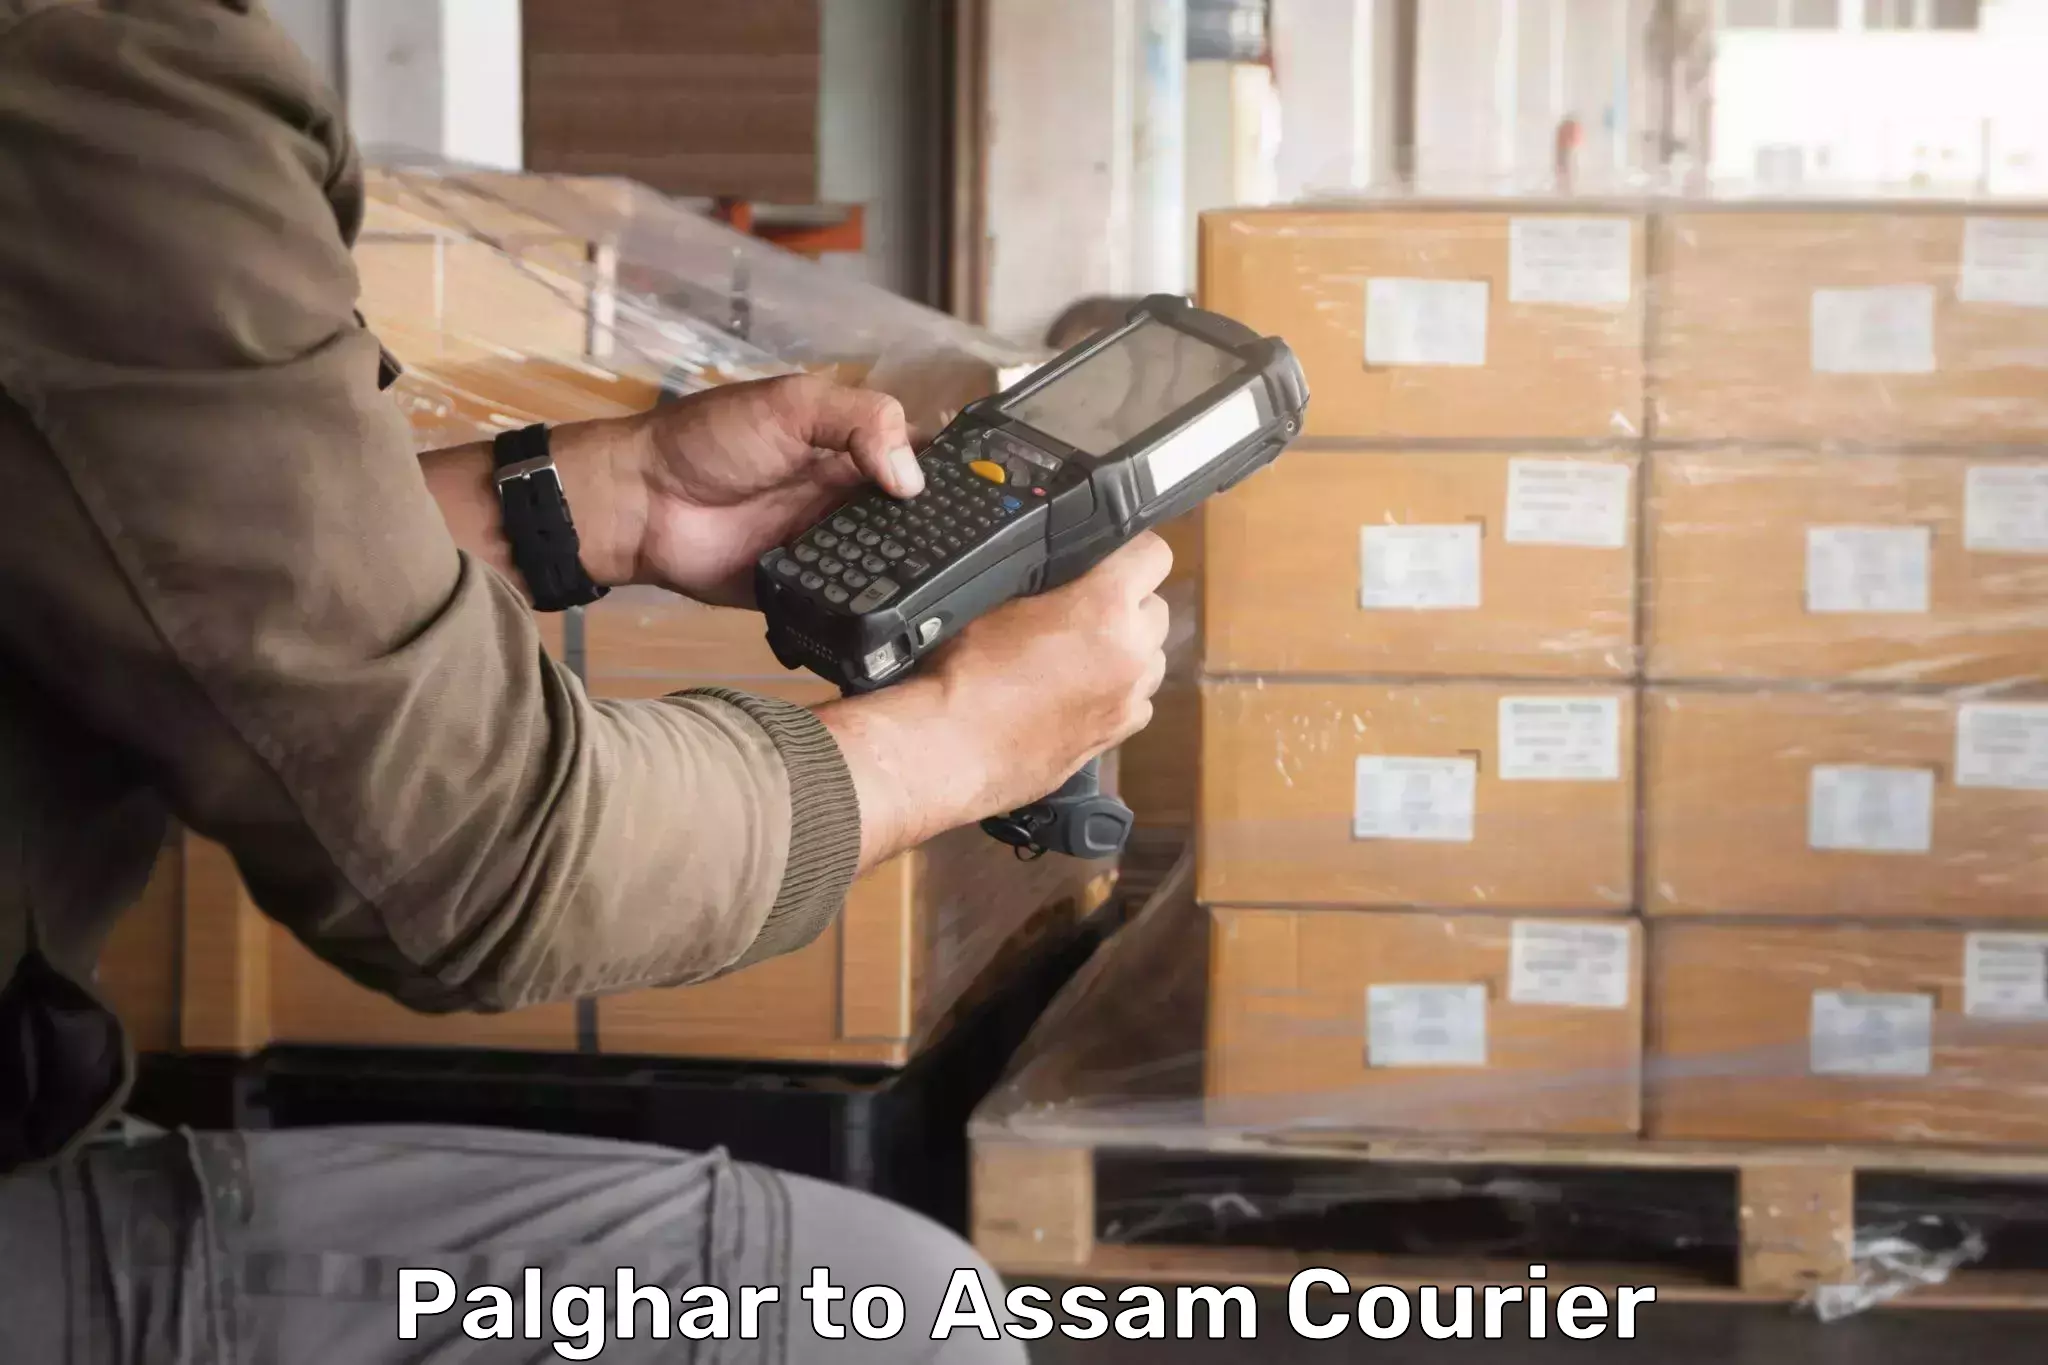 Residential courier service Palghar to IIIT Guwahati